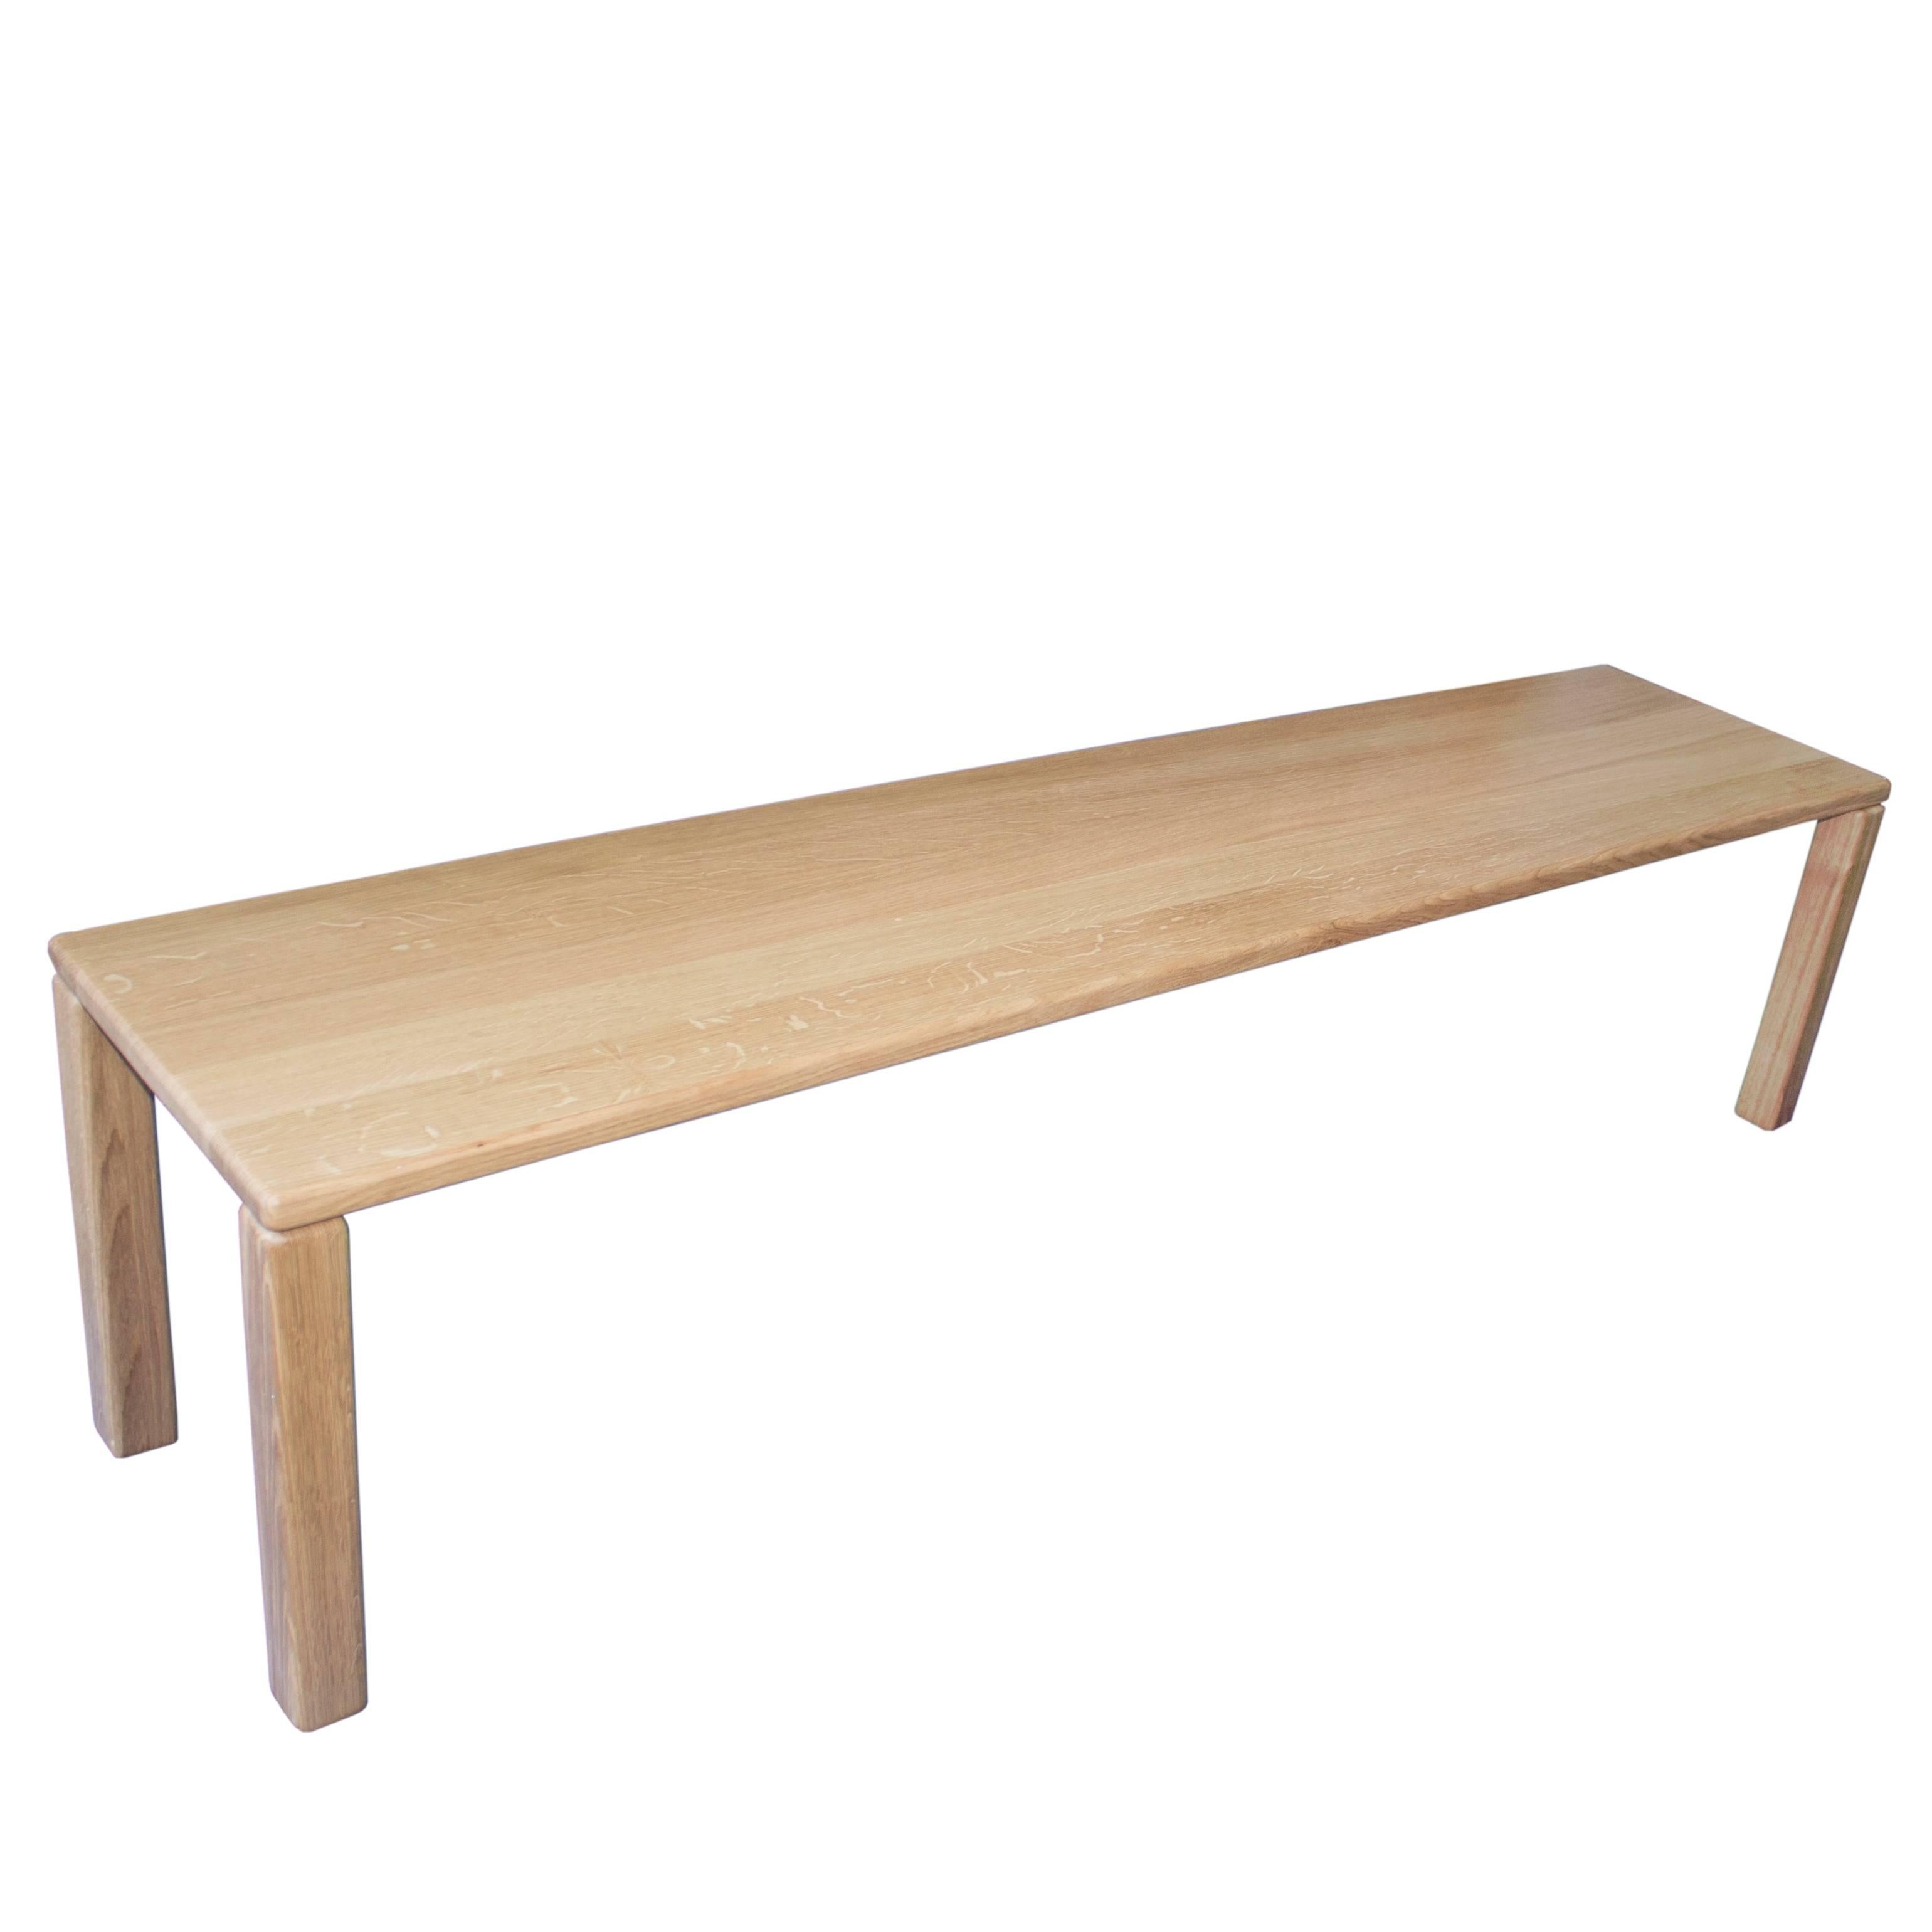 A modern Classic, the objection element bench is a straight-lined bench at its most elemental.